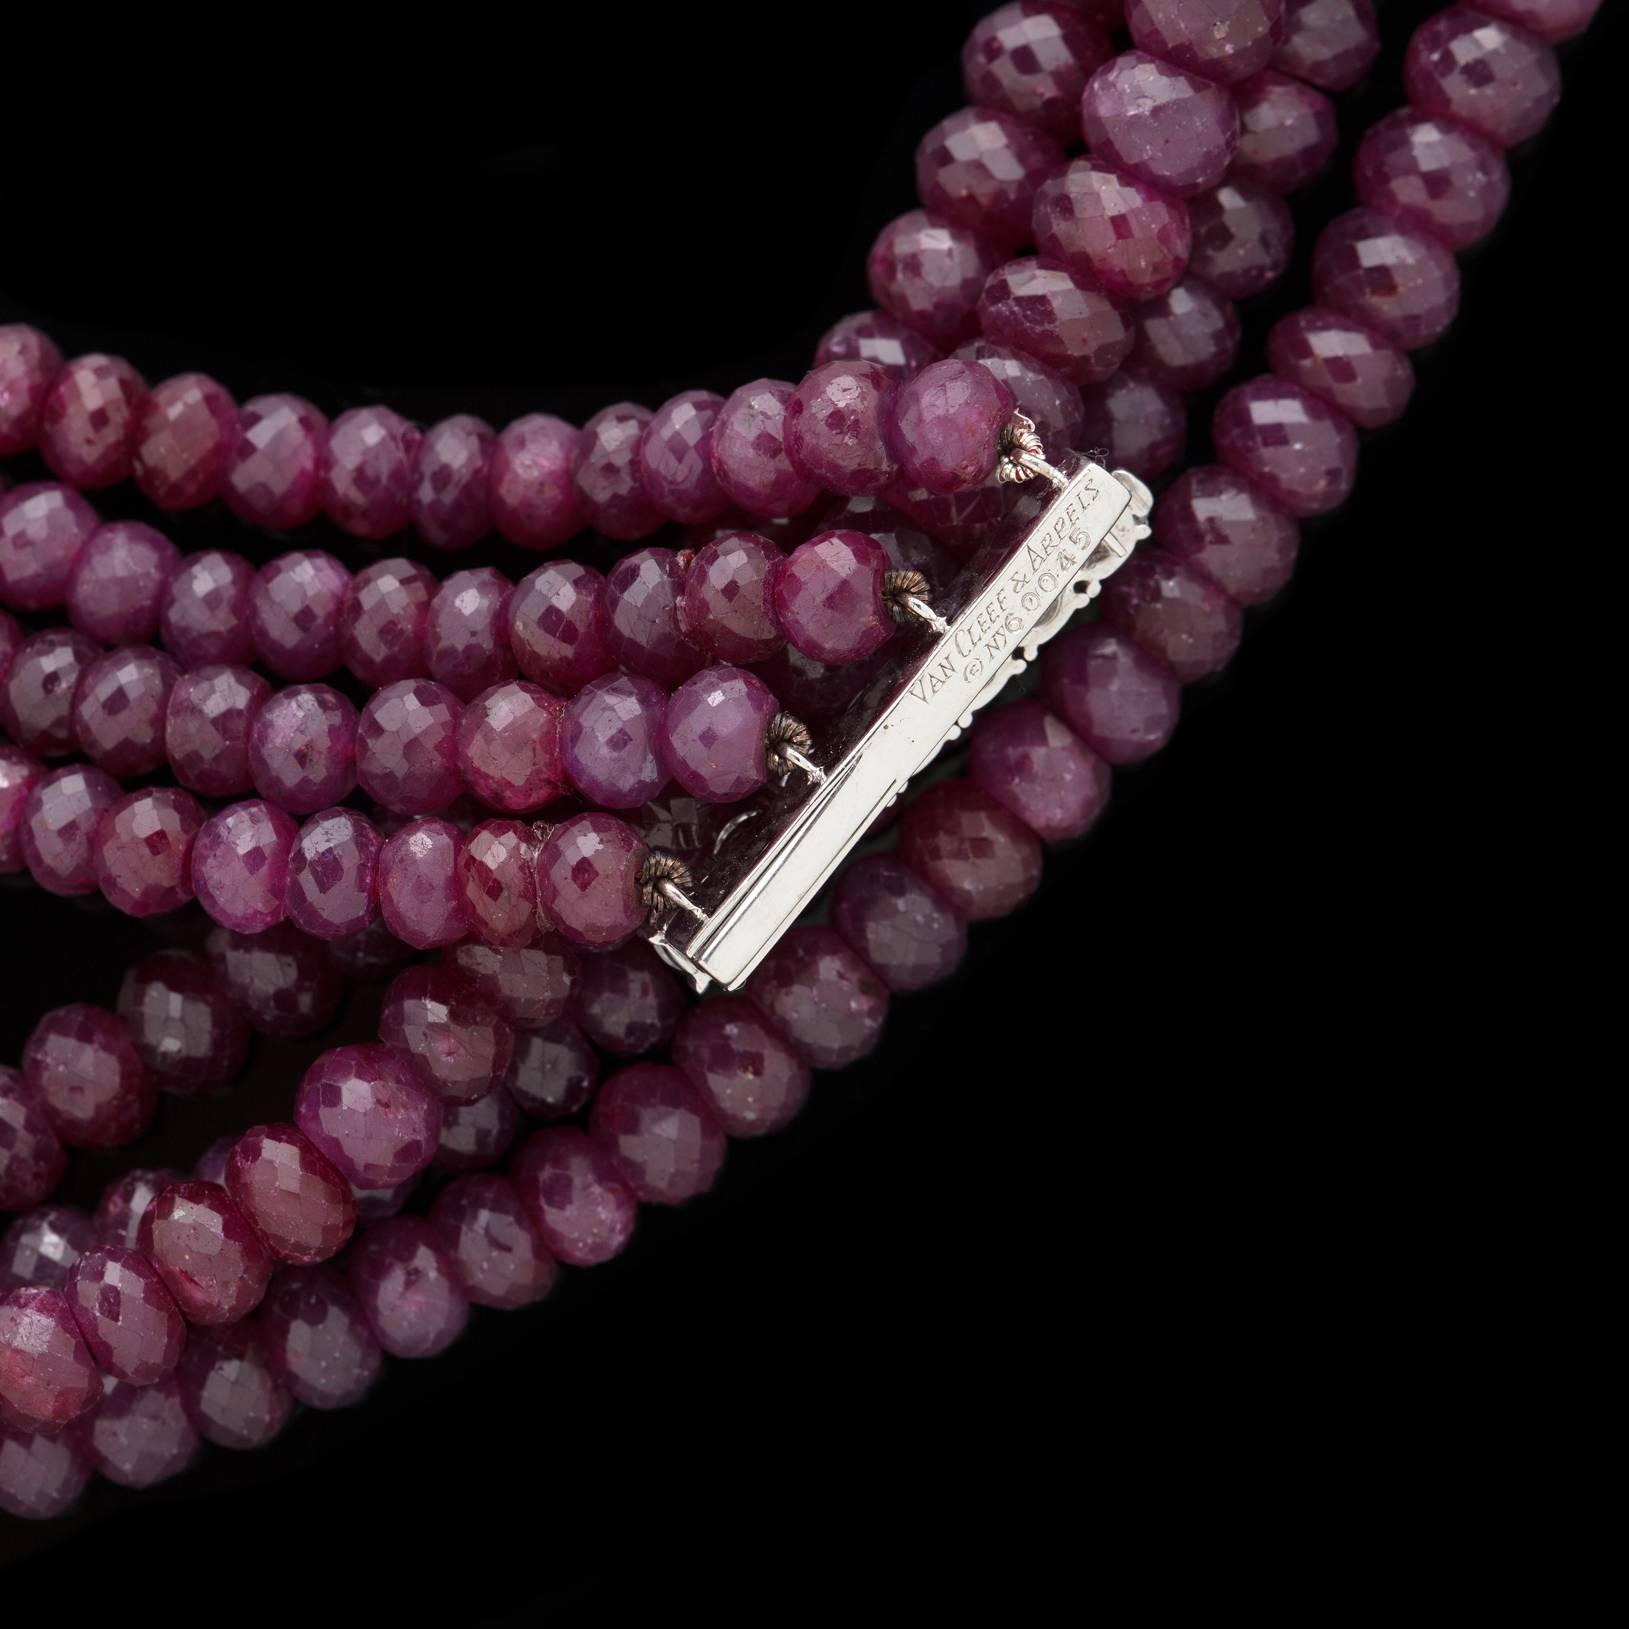 Women's or Men's Ruby Necklace on Rare Van Cleef & Arpels Diamond Clasp